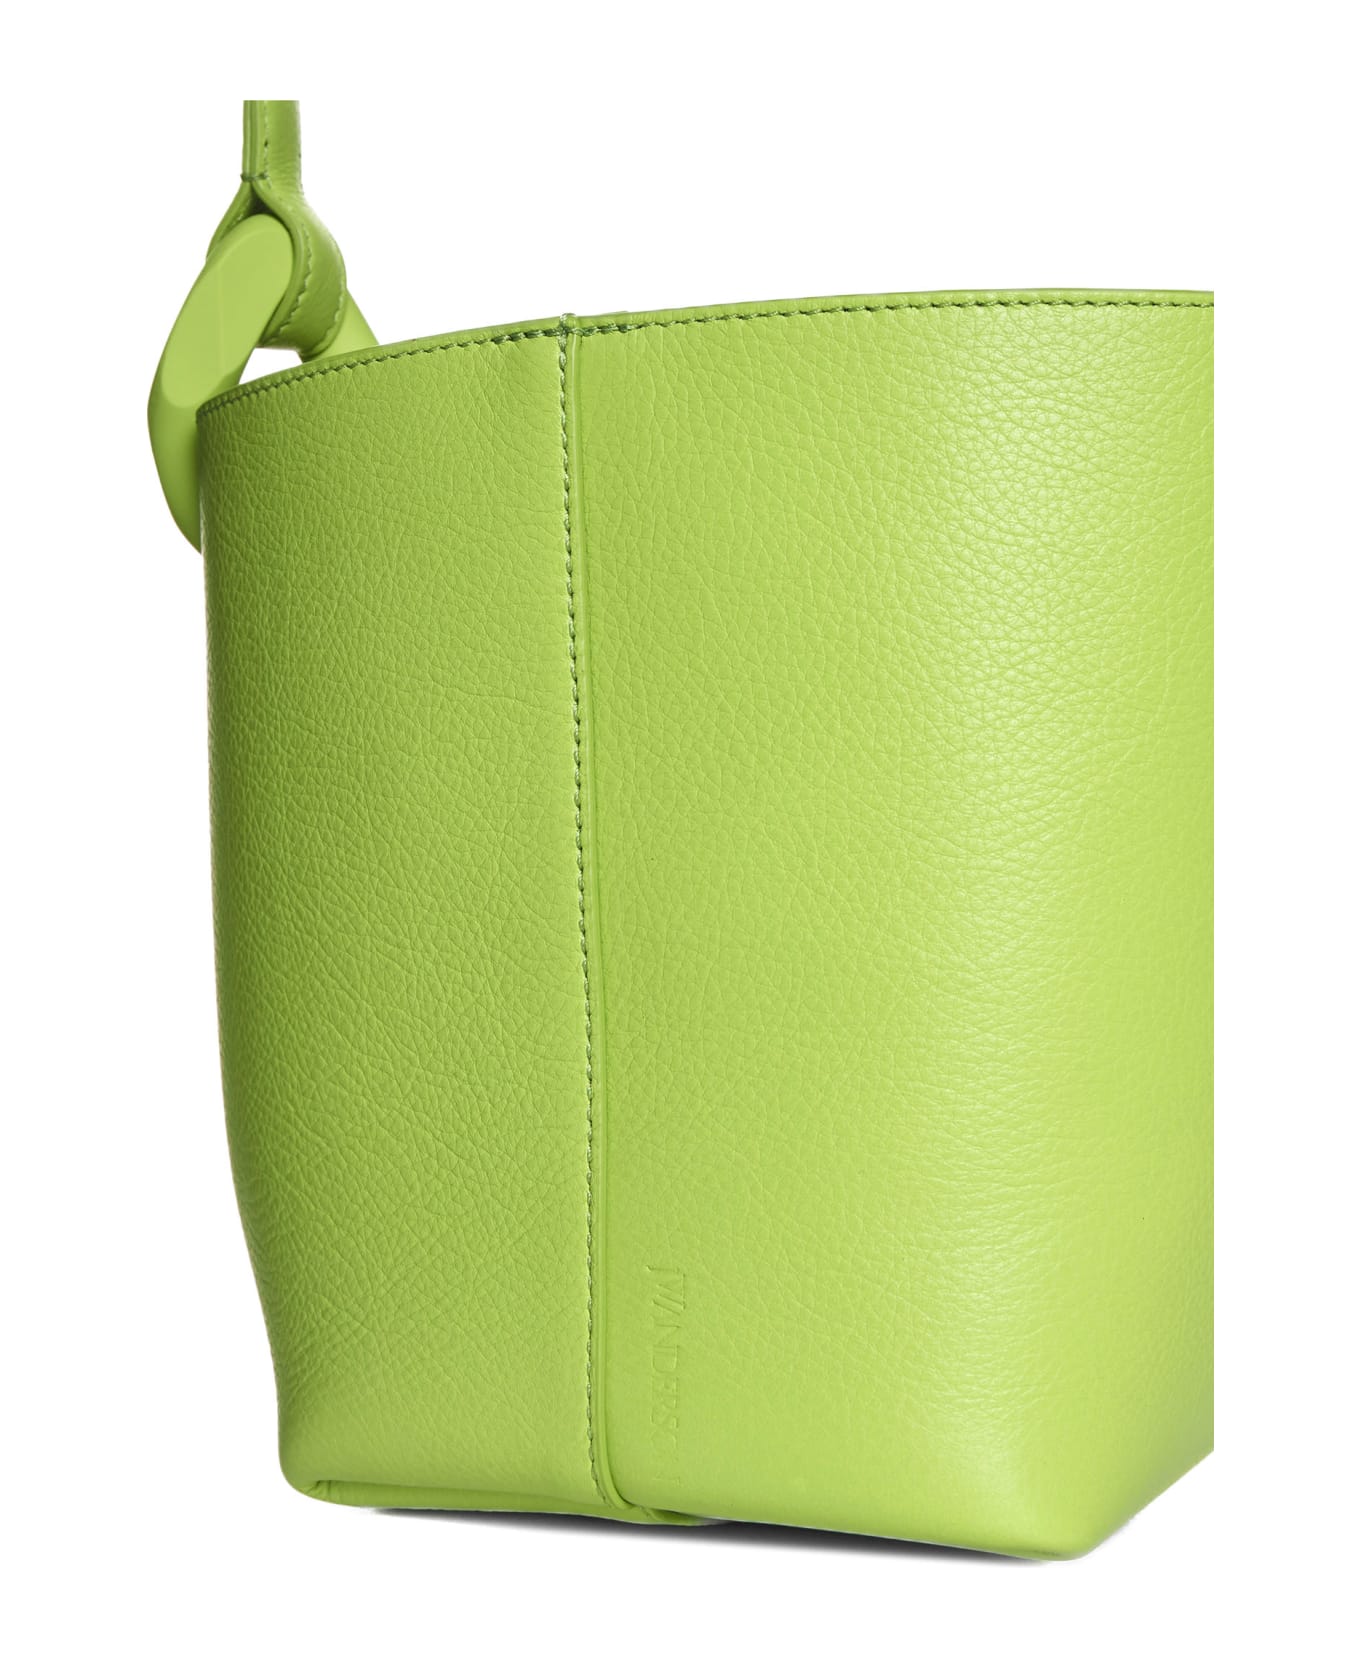 J.W. Anderson Tote - Lime